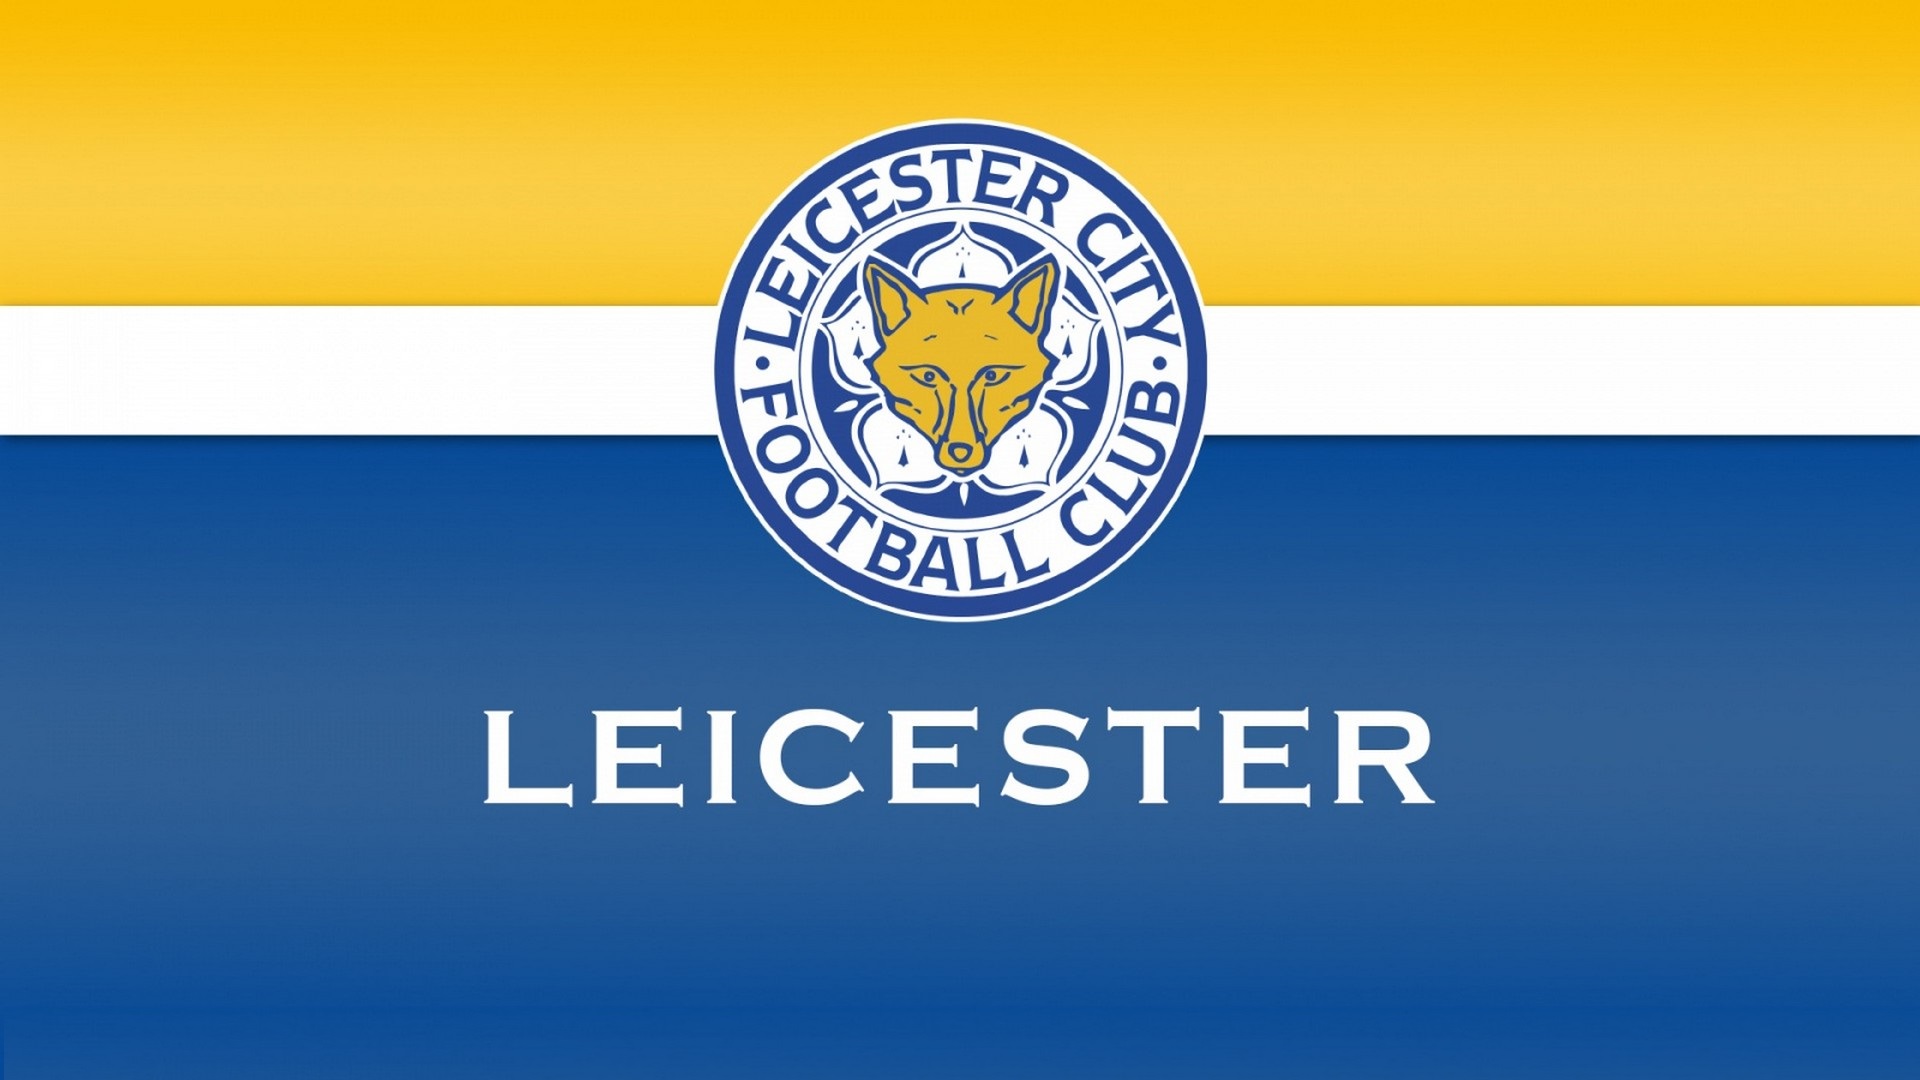 HD Backgrounds Leicester City With high-resolution 1920X1080 pixel. You can use this wallpaper for your Desktop Computers, Mac Screensavers, Windows Backgrounds, iPhone Wallpapers, Tablet or Android Lock screen and another Mobile device